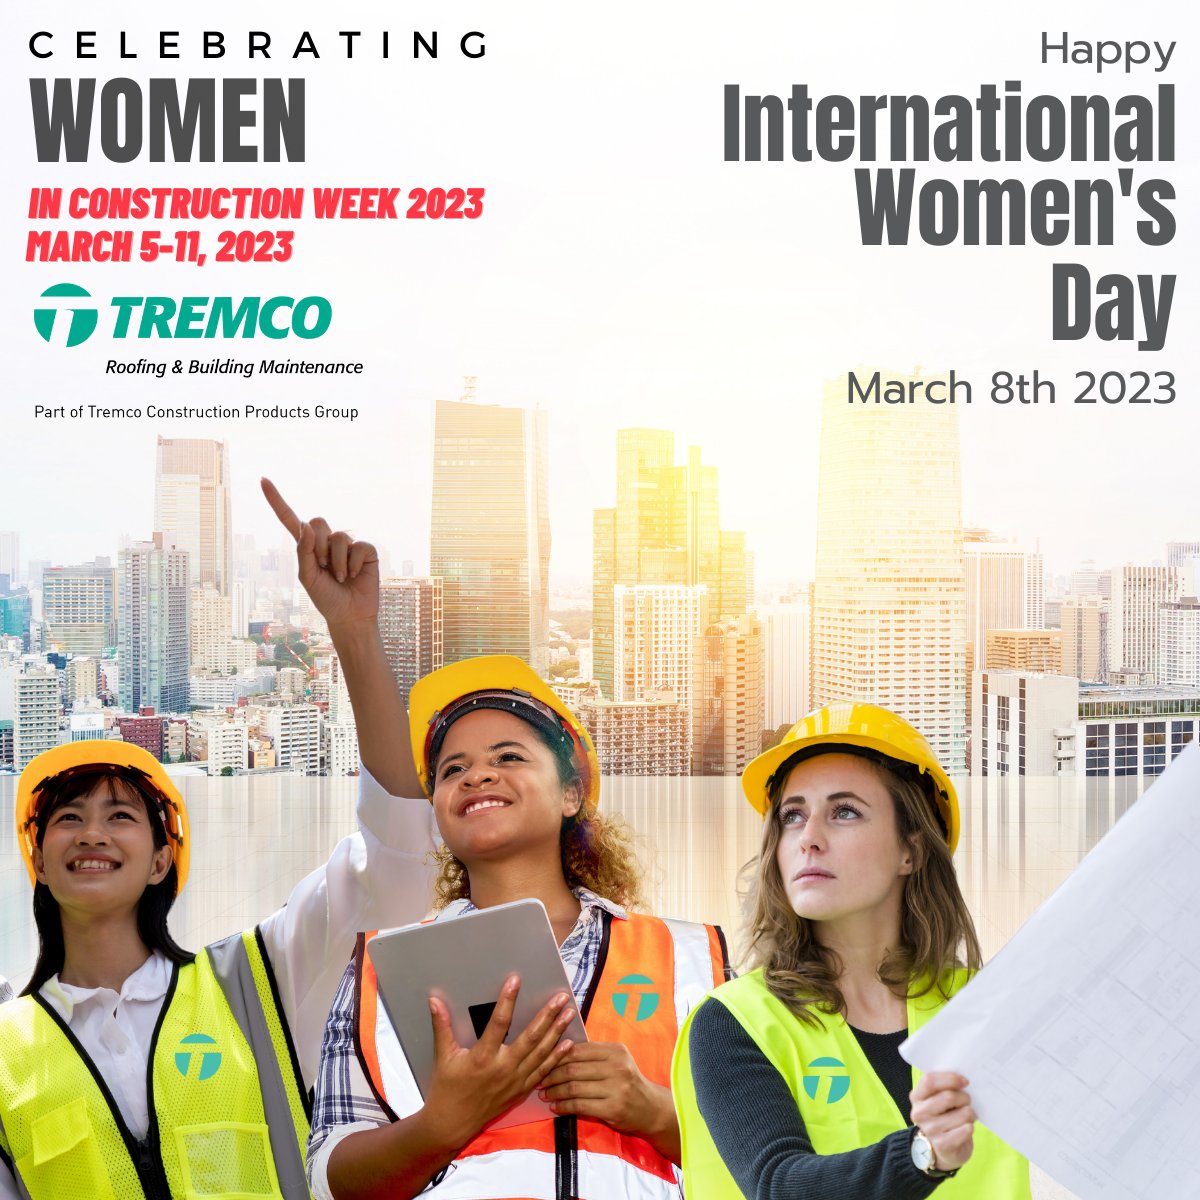 In honor of Women in Construction Week and International Women's Day, we would like to highlight and celebrate all the incredible women in the construction industry! #WICWEEK2023 #WomenInConstruction #InternationalWomenDay #NWIC #NWIR #Tremco #TeamTremco